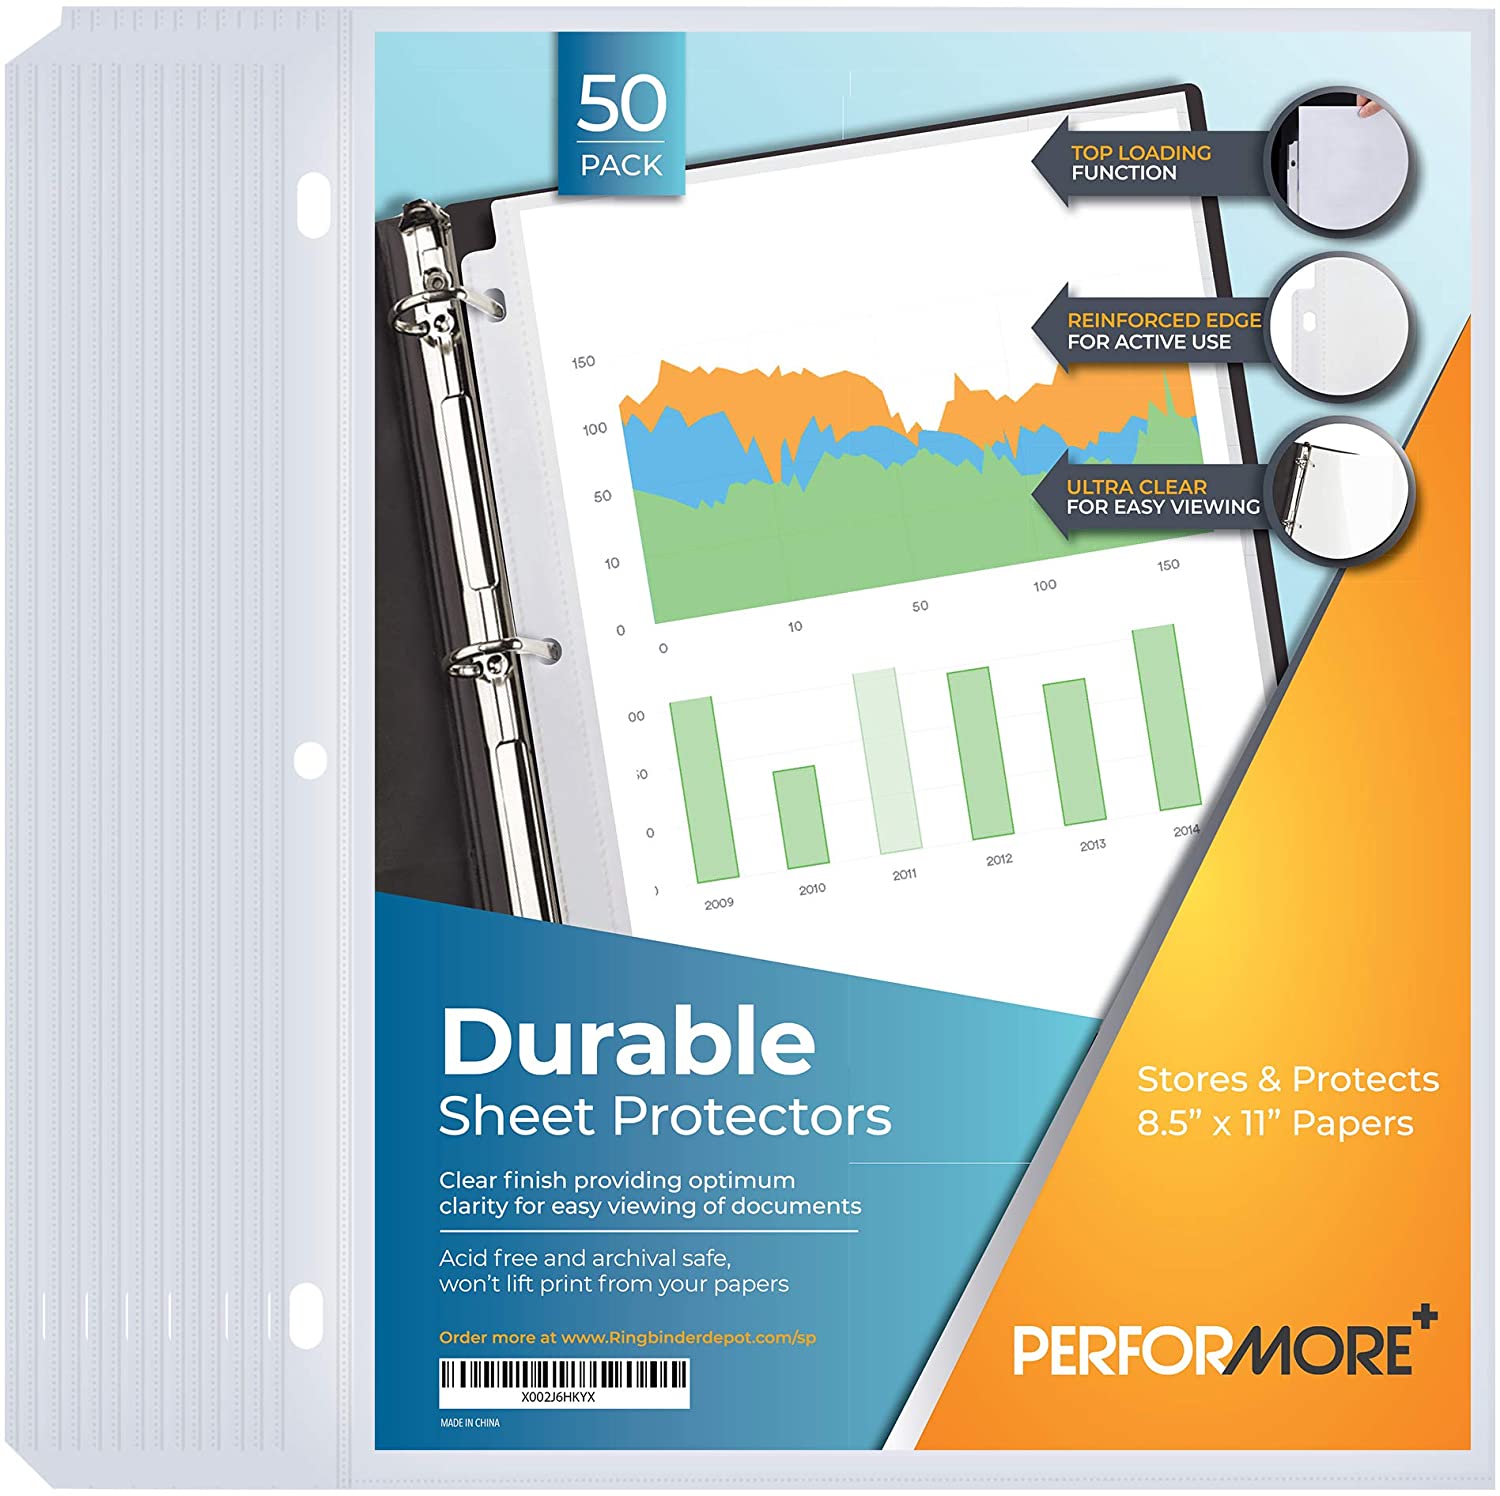 Page Protectors – Value Pack - Tessera Publishing